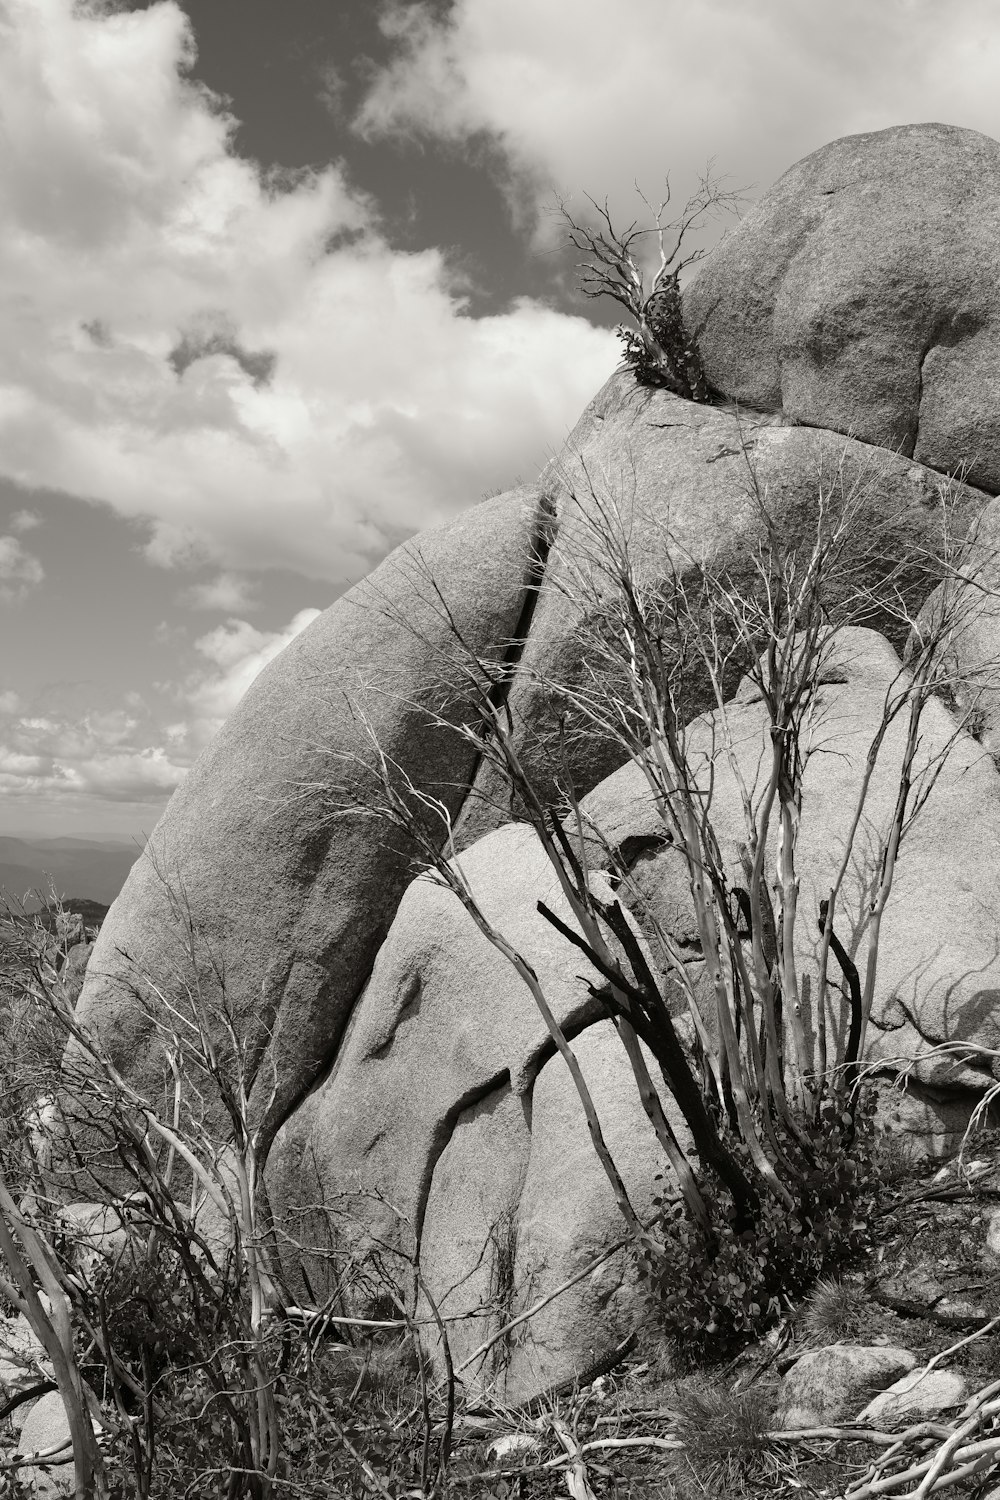 a black and white photo of rocks and plants